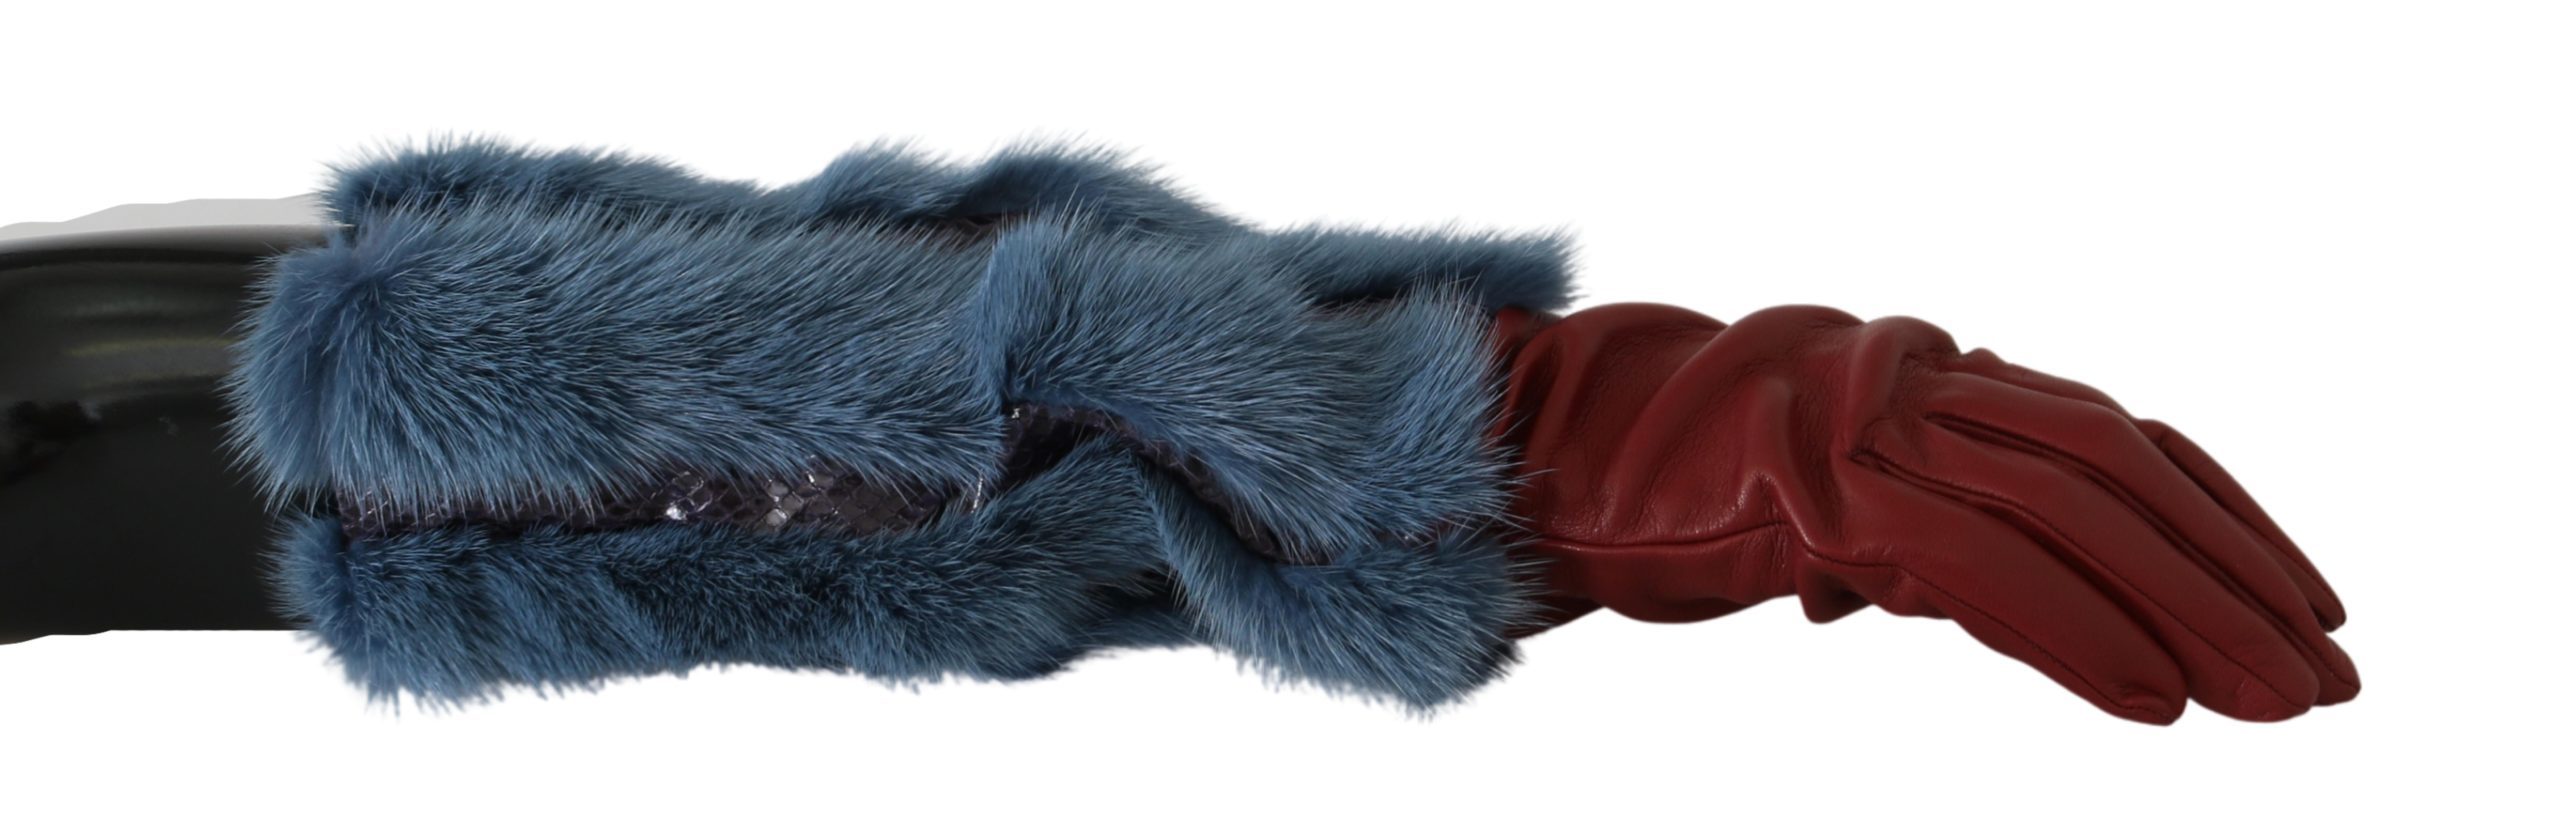 Dolce & Gabbana Women's Fur Mid Arm Length Leather Gloves Red LB1005 - 7.5|S